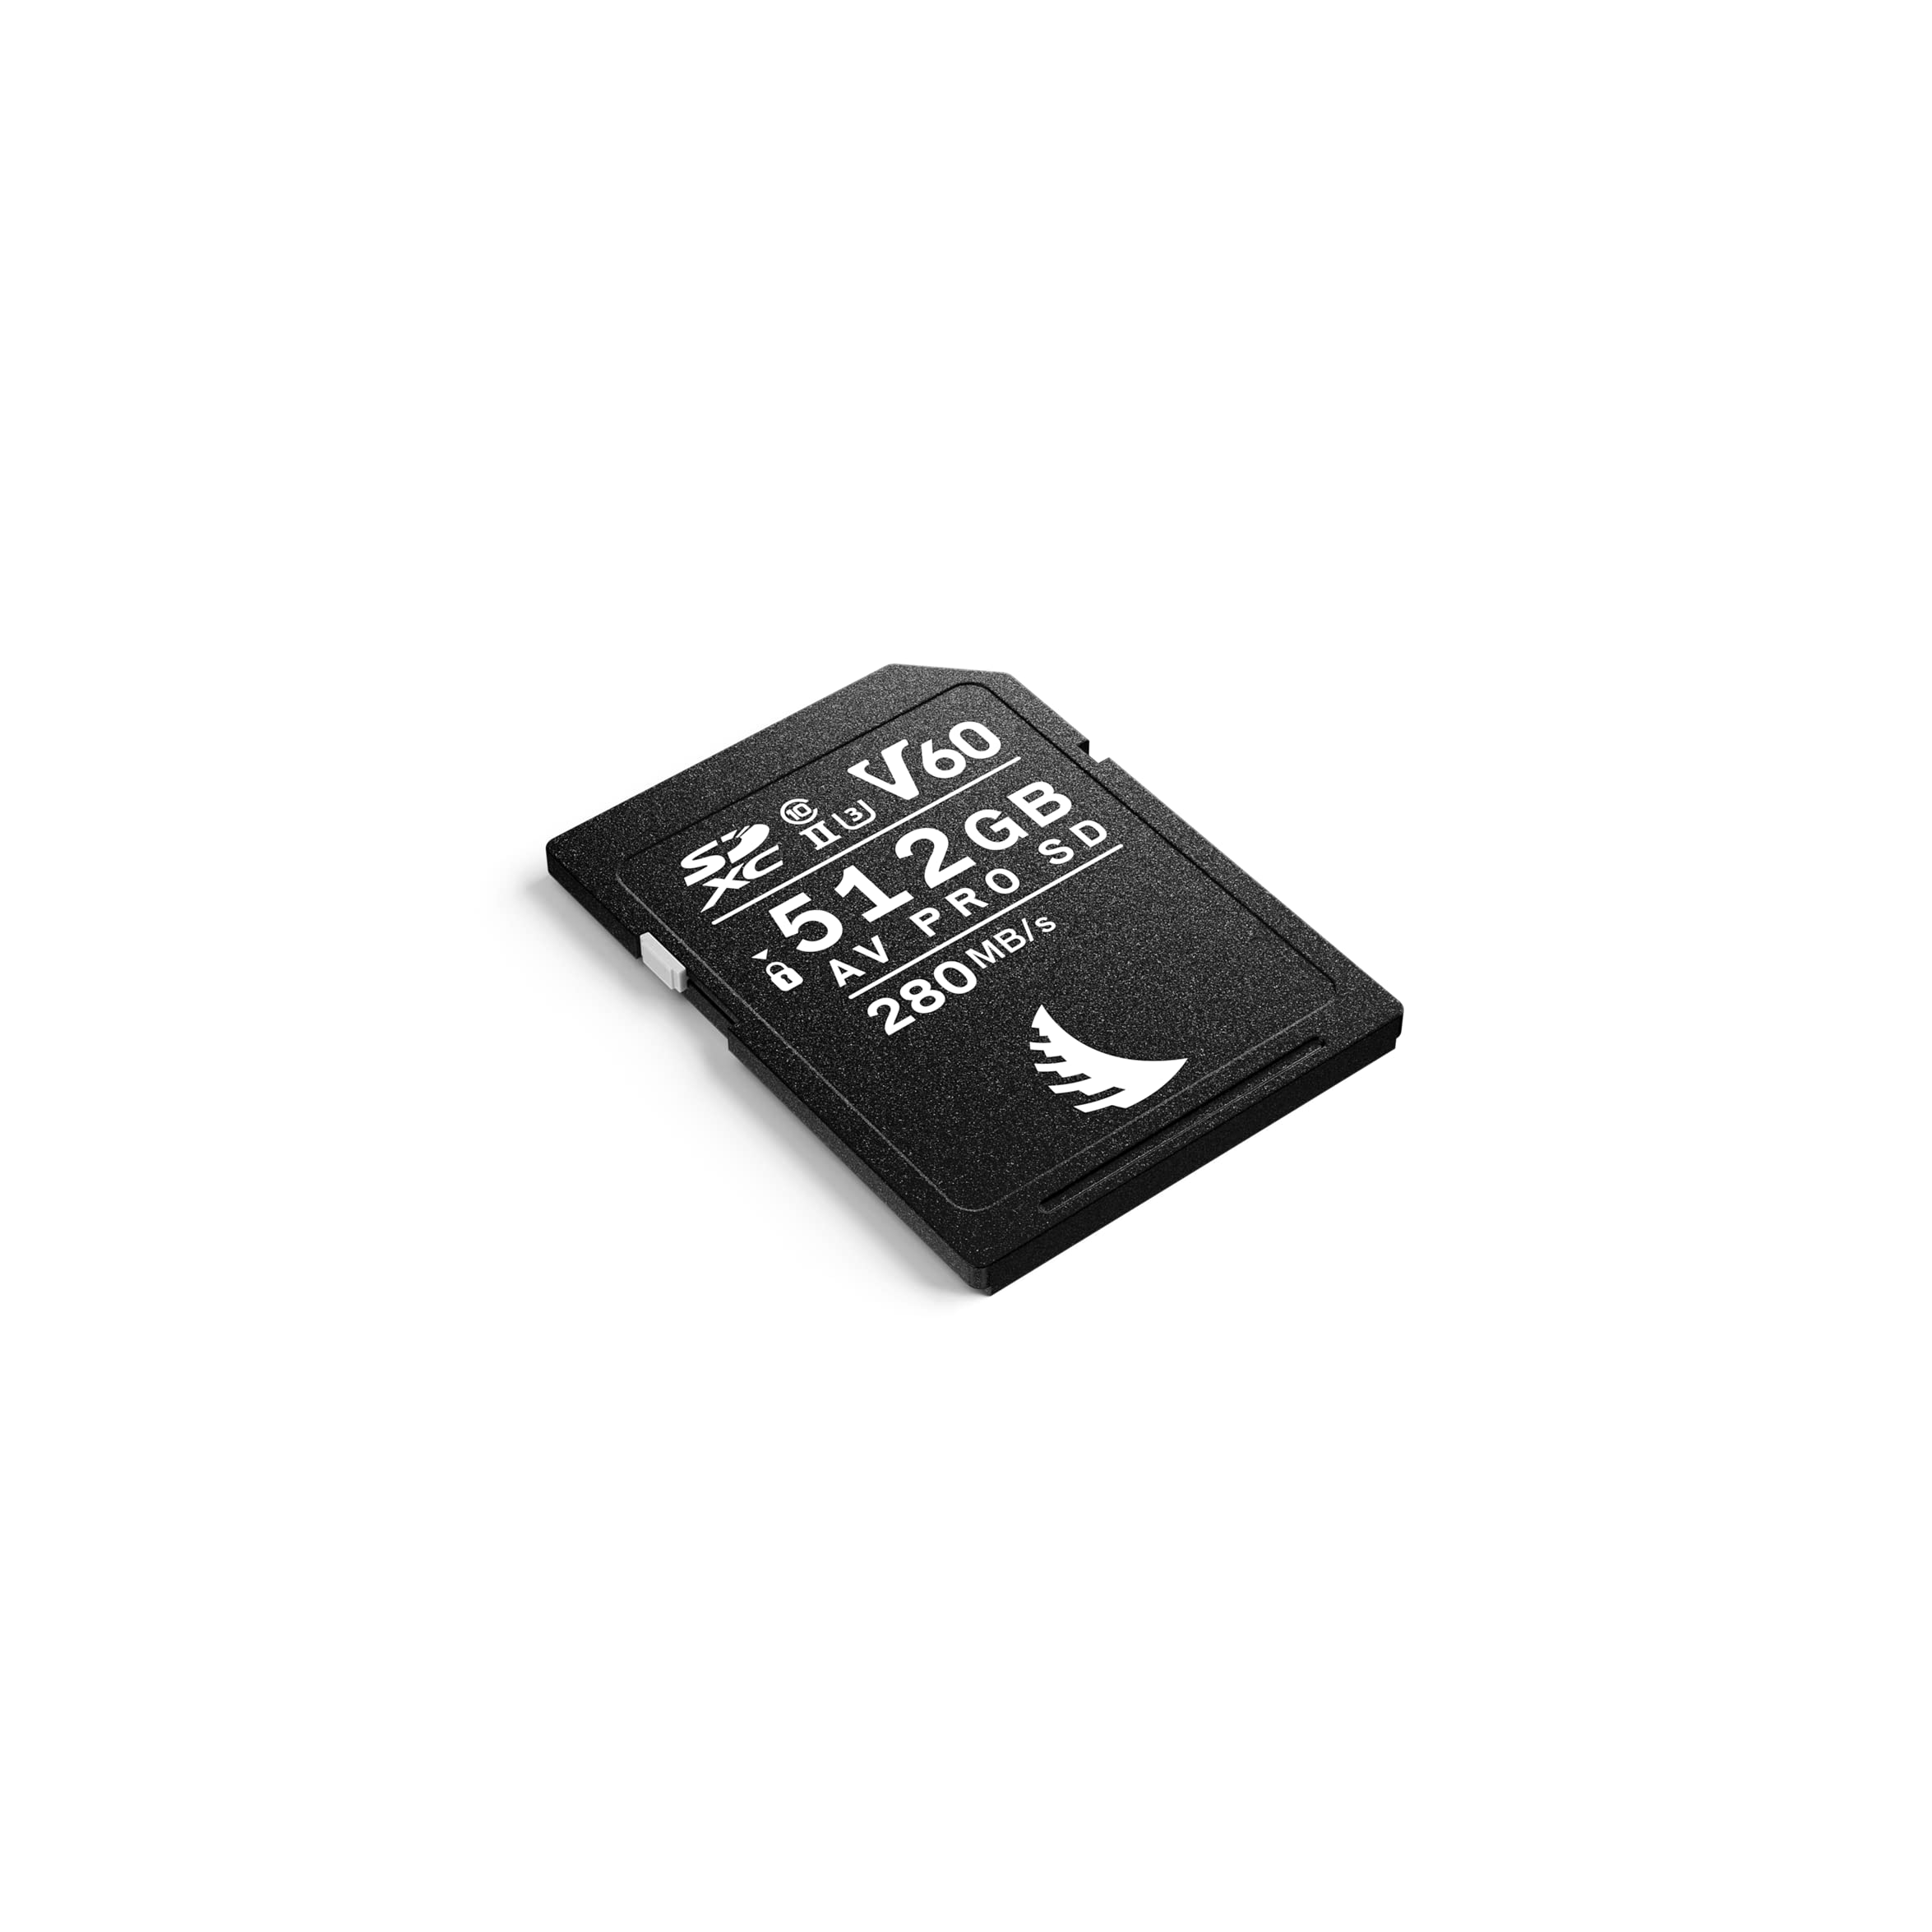 Angelbird - AV PRO SD V60 MK2-512 GB - SDXC UHS-II Memory Card - Widely Compatible - up to 6K - for High-Res Photography, Continuous Mode Shooting and Light Video Production